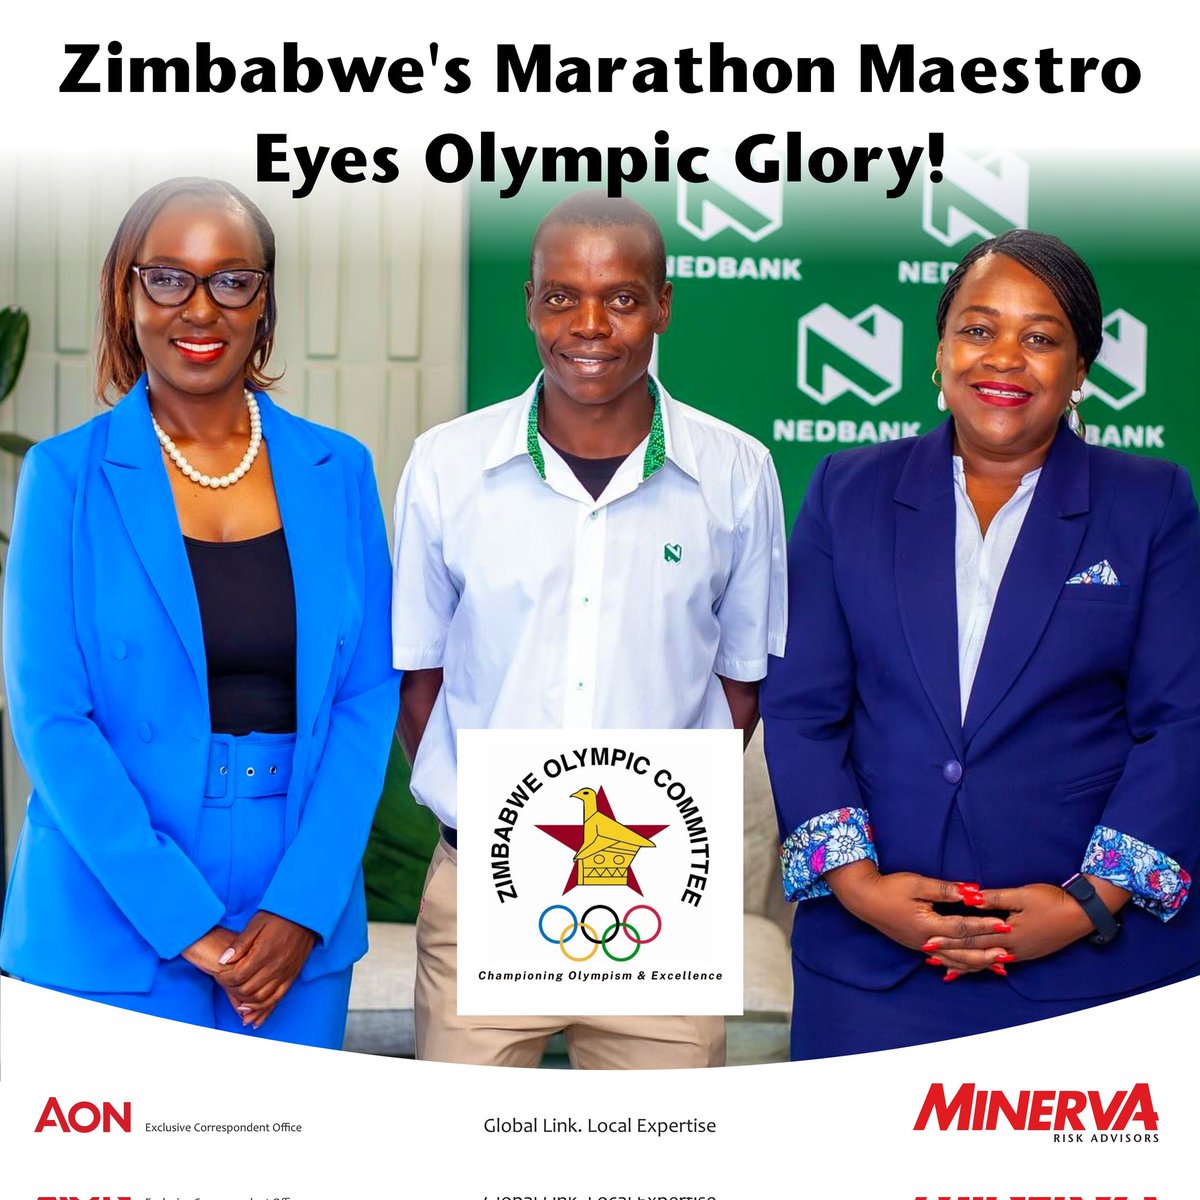 Meet Isaac Mpofu: A name synonymous with grit and excellence in the marathon world. One of two Zimbabwean athletes to qualify for the Olympics. As Paris 2024 draws near, Isaac is gearing up to shine on the global stage, carrying his nation's pride with him every step of the way.…